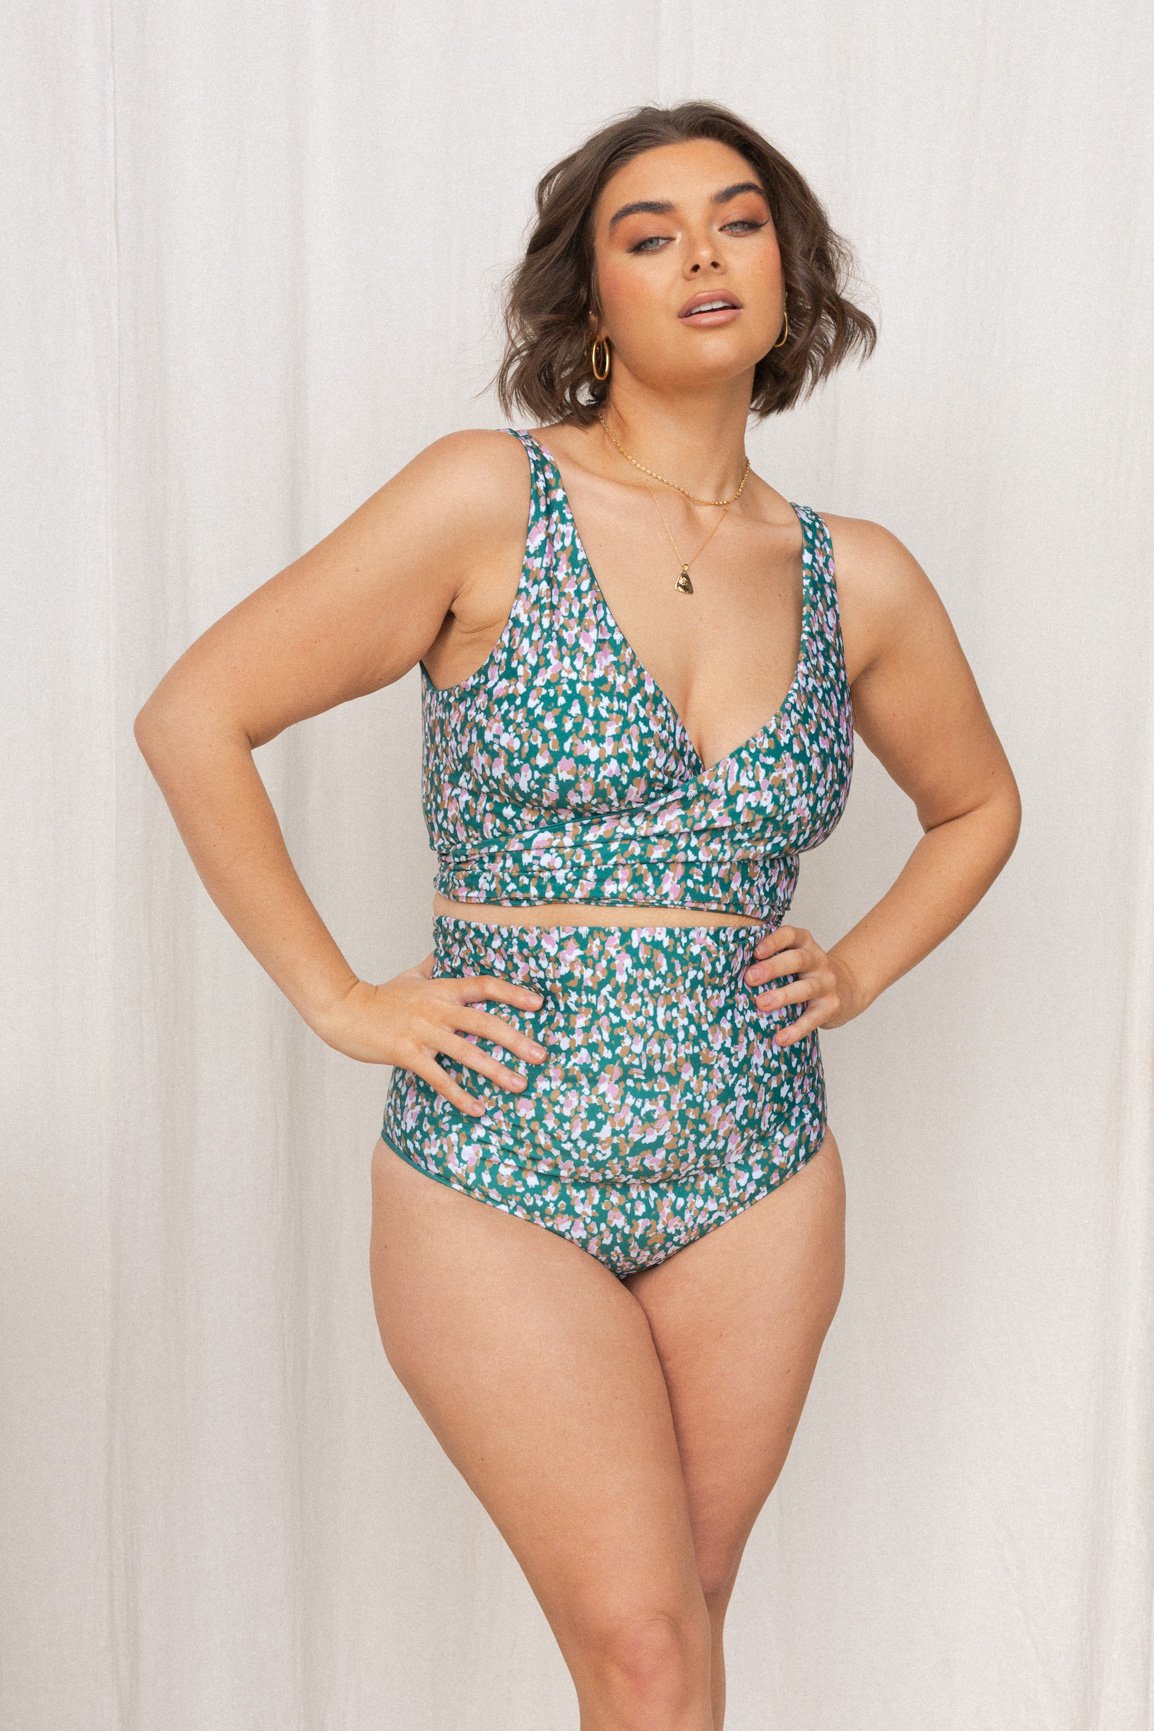 Plus size activewear brand Lulah Collective closes down